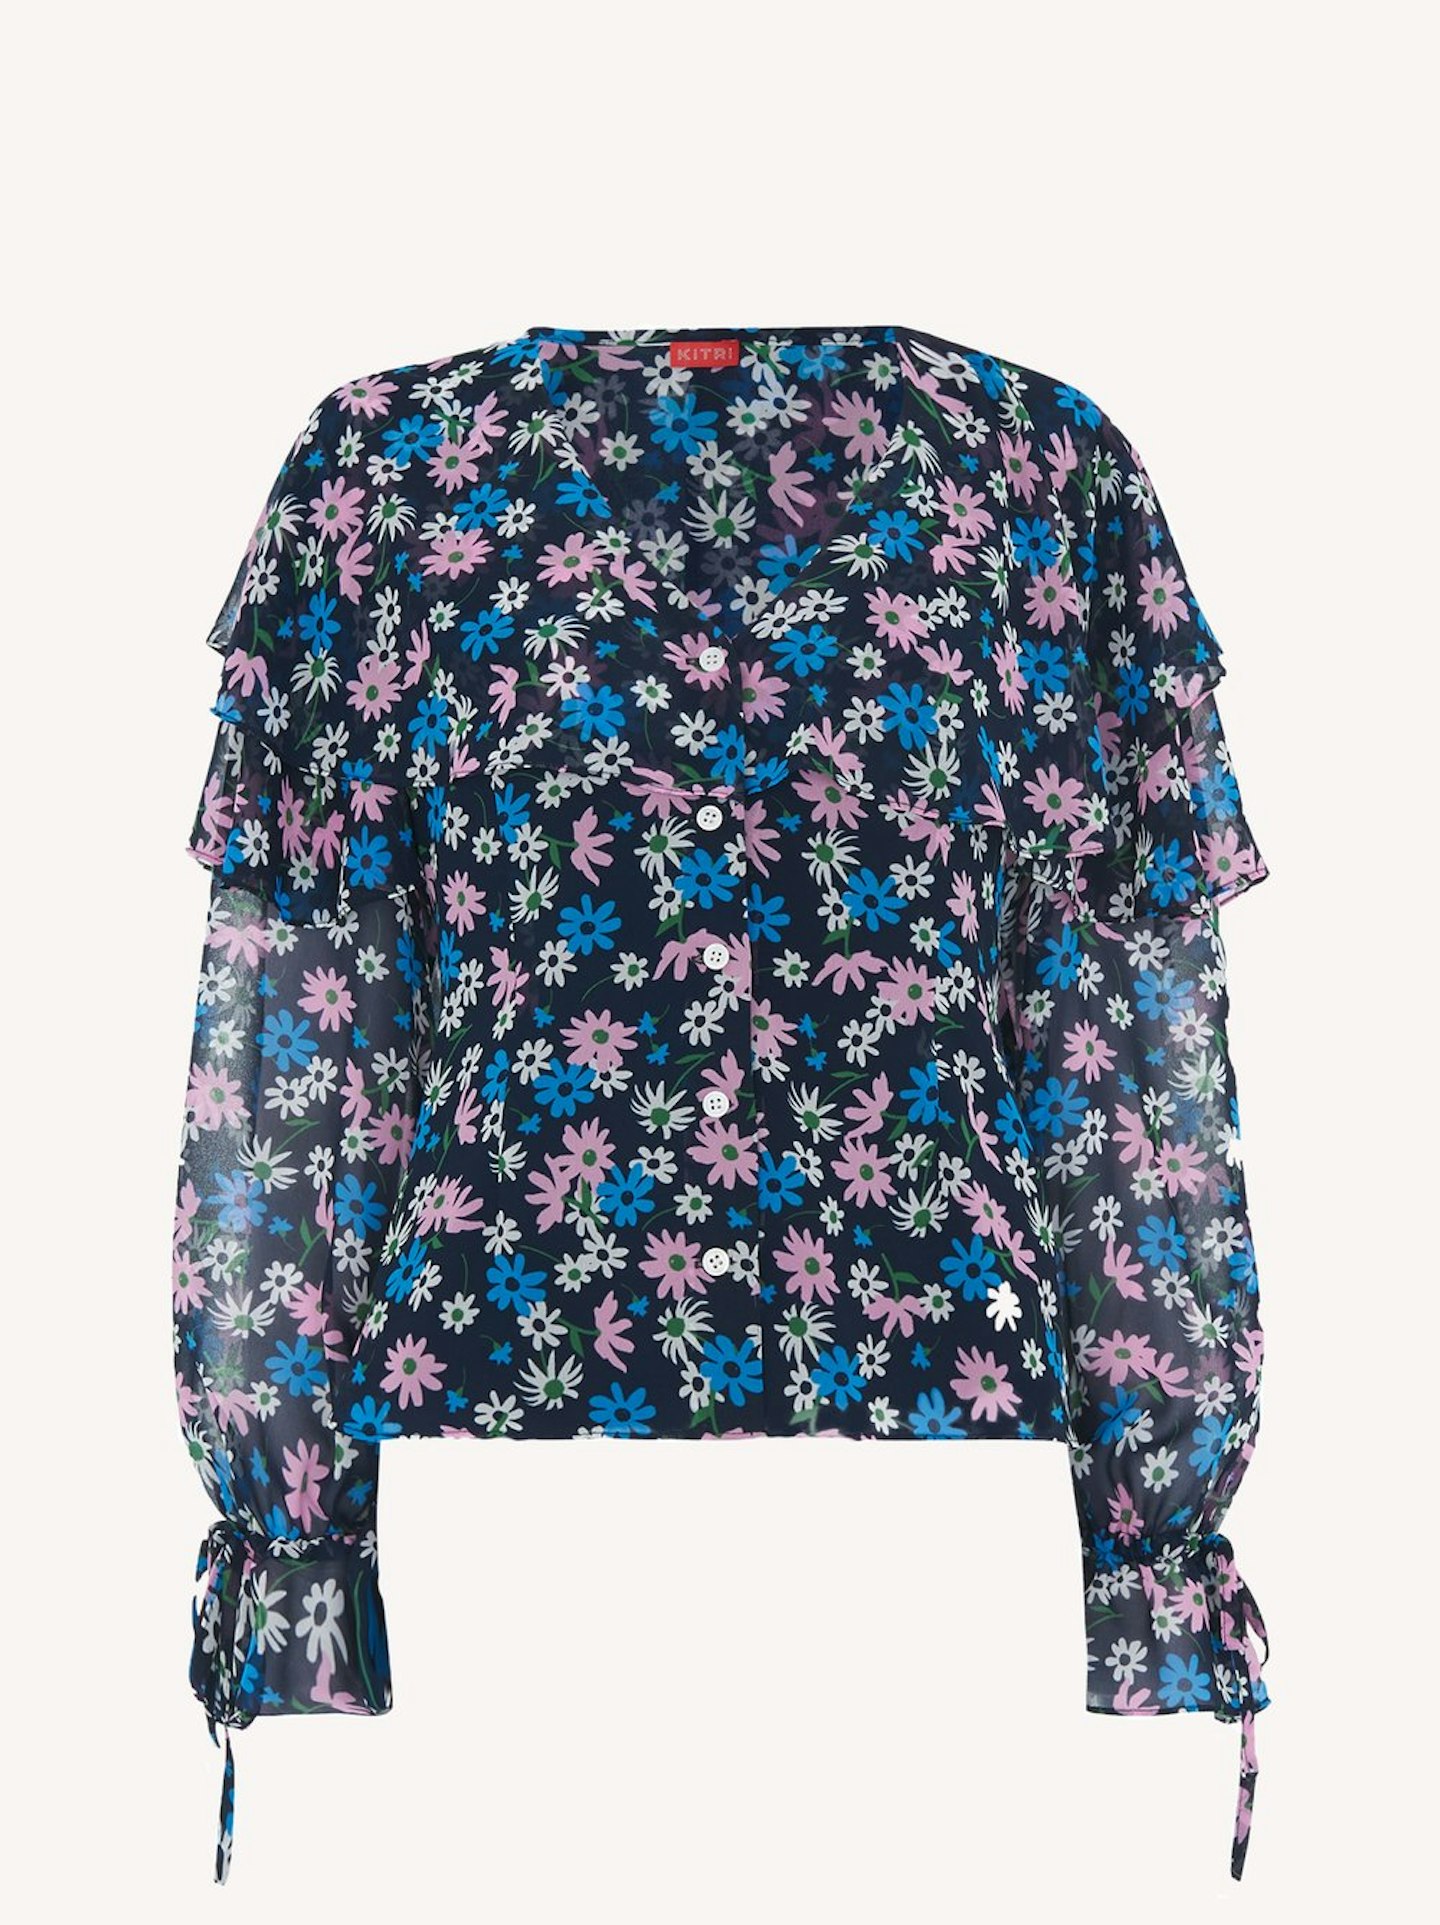 Ray Floral Print Blouse, £85